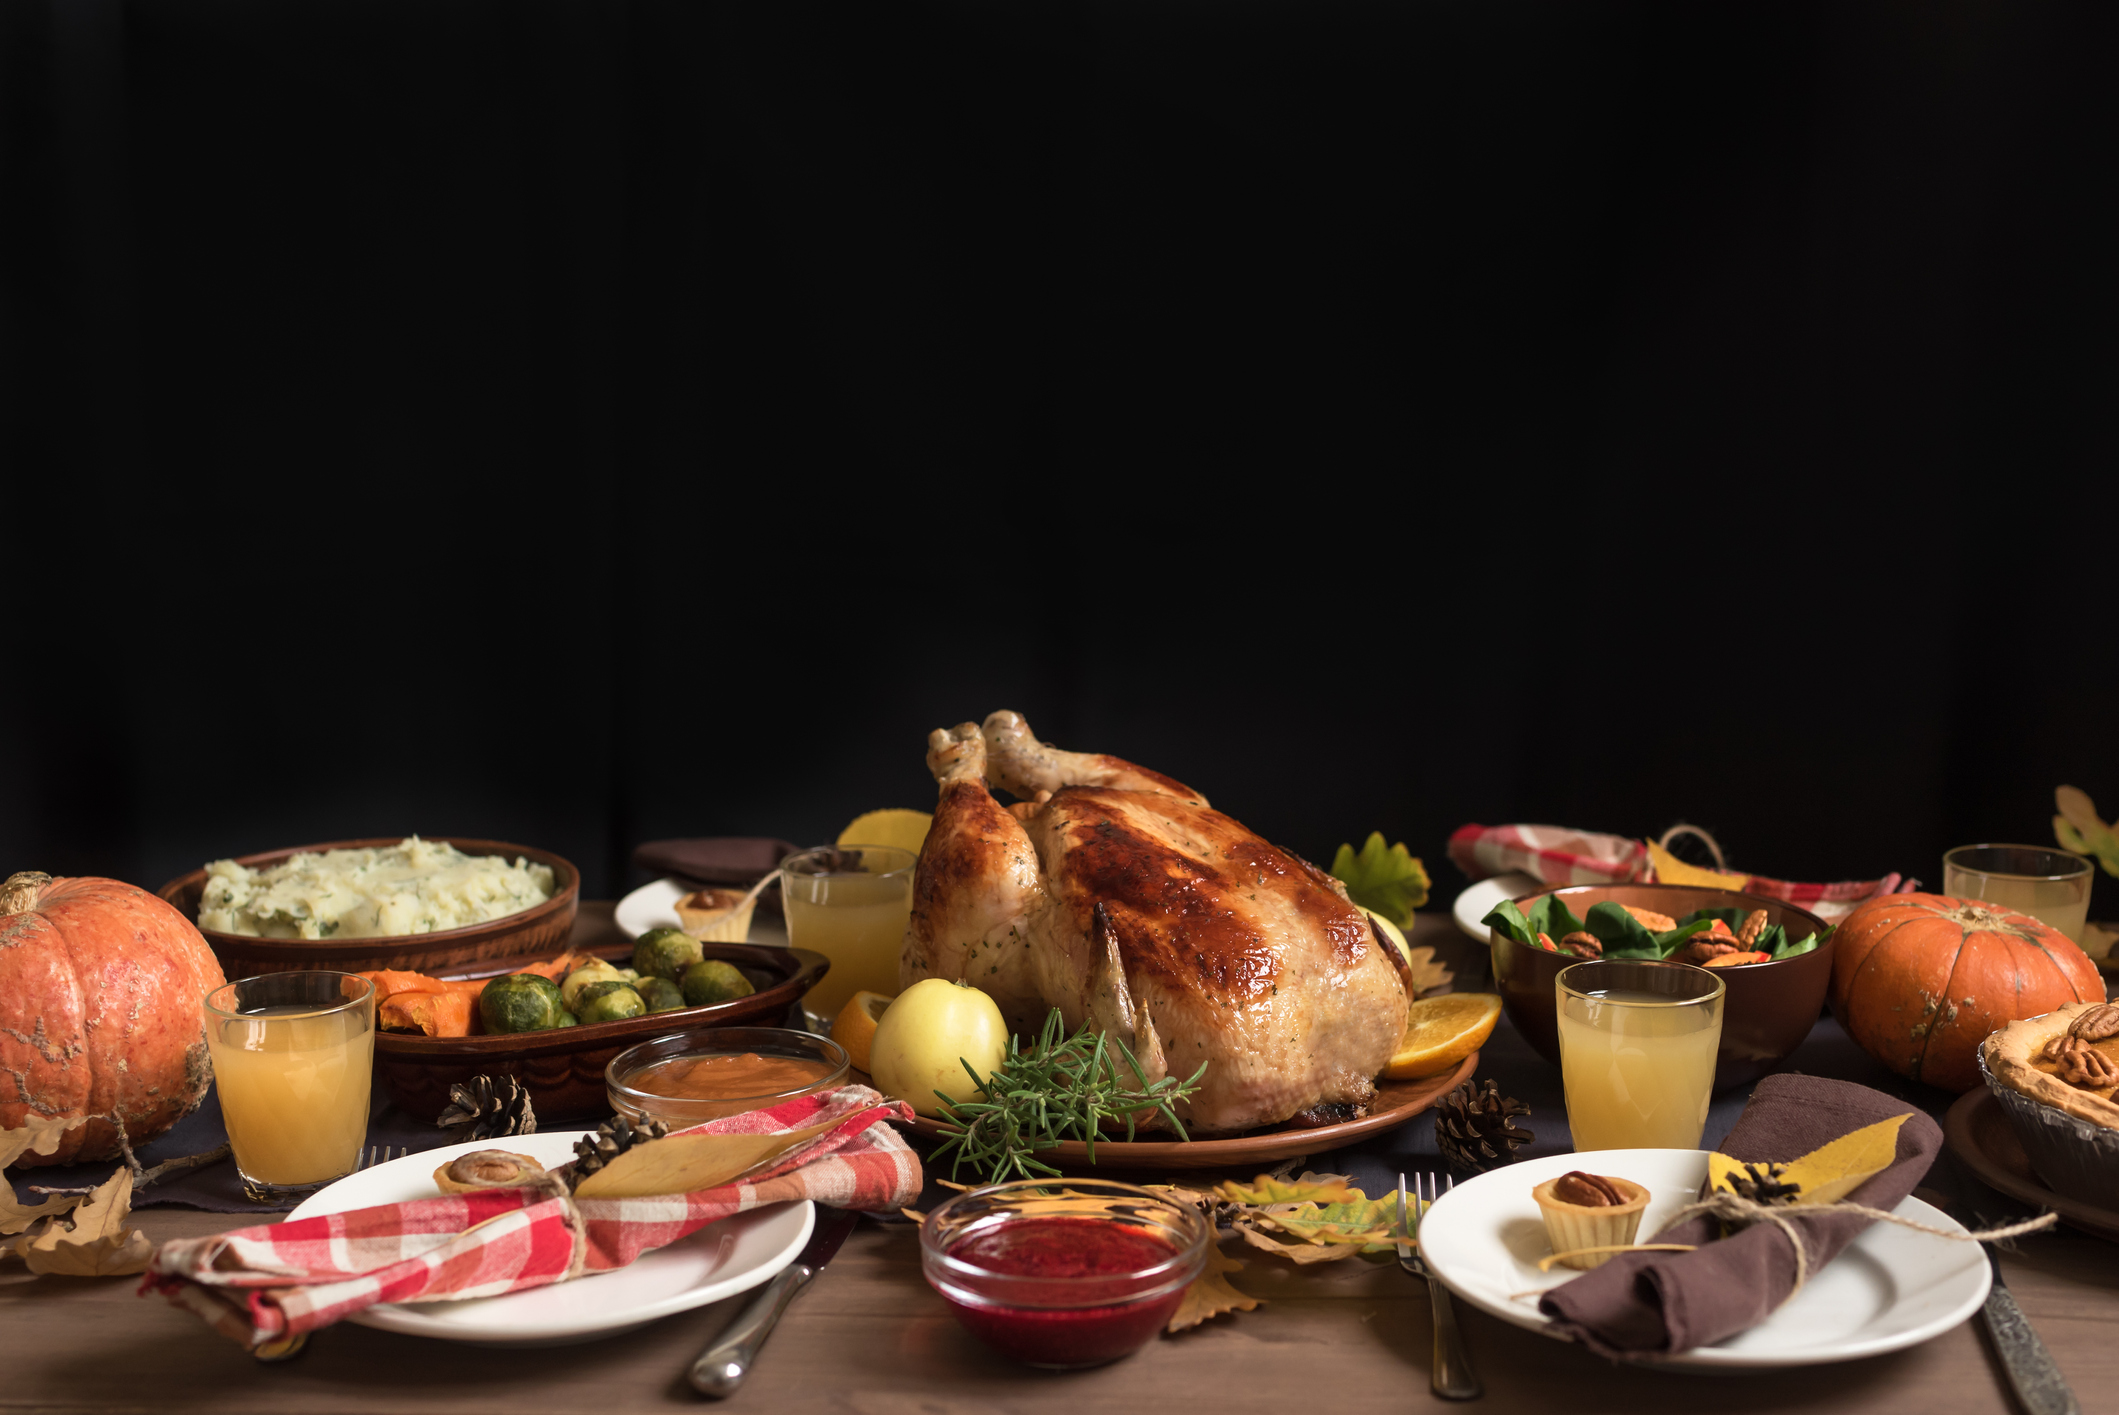 Thanksgiving Dinner Costs Less Time and Money - America's Future